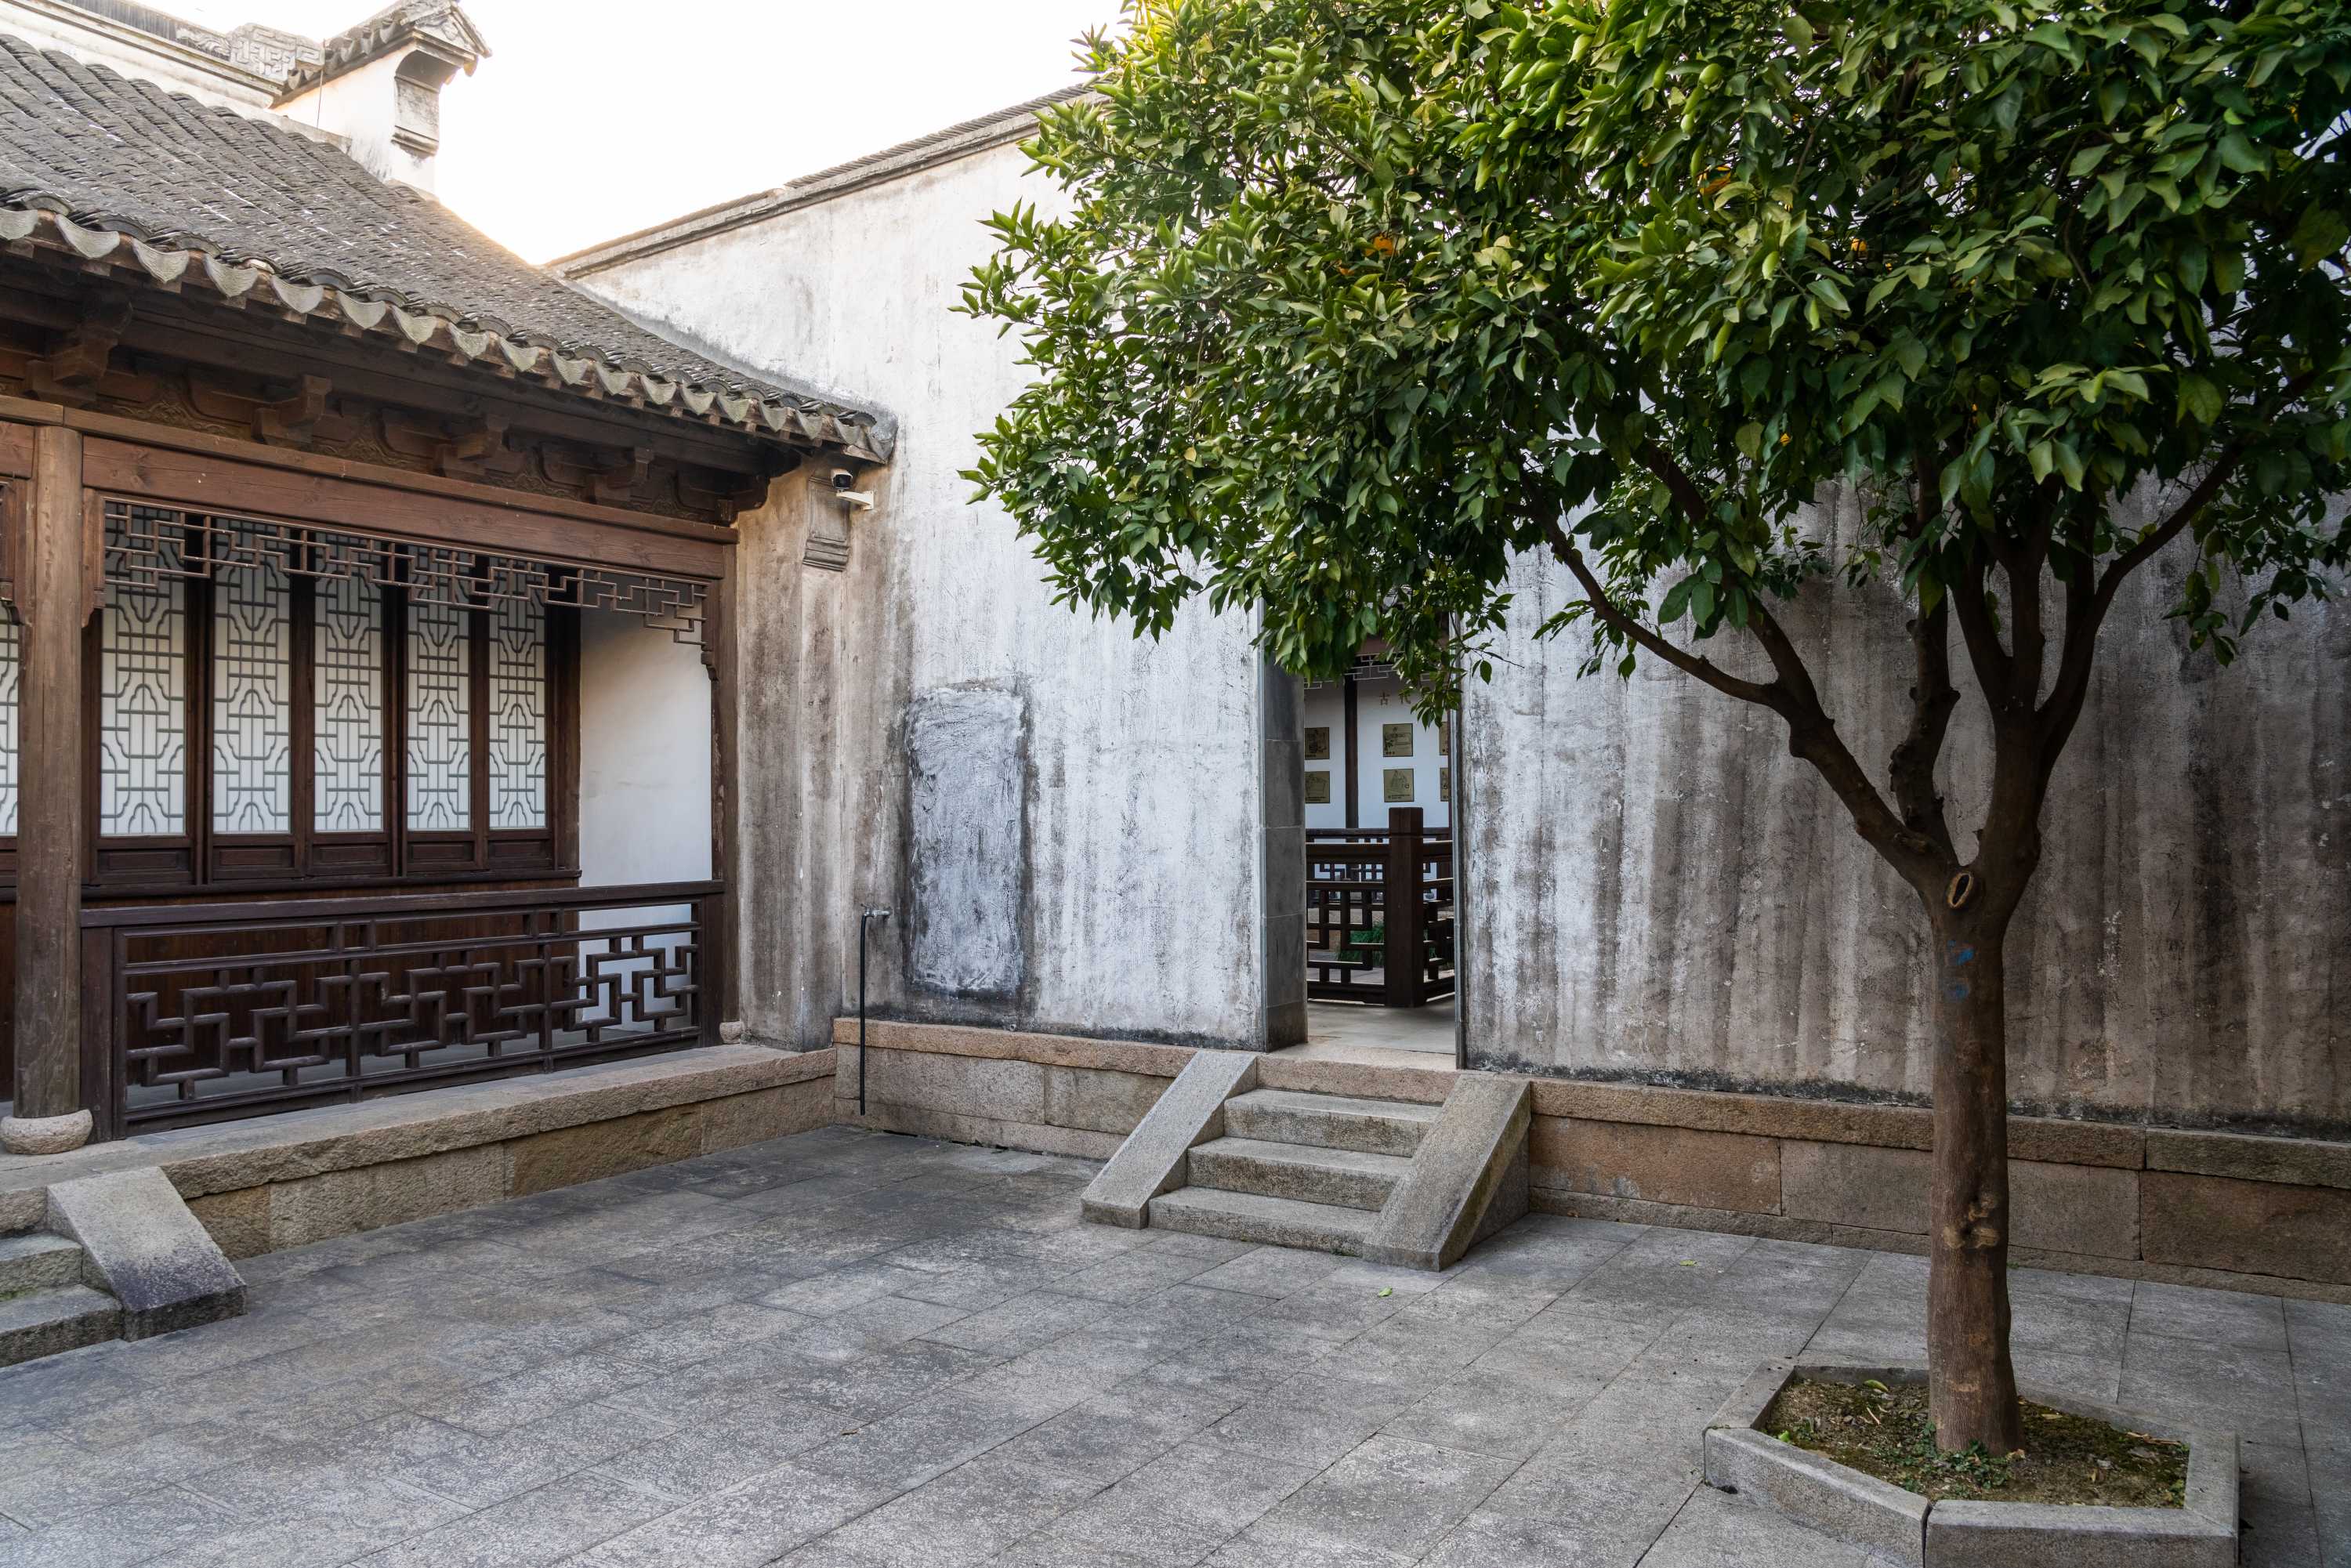 China, Confucius and the courtyard